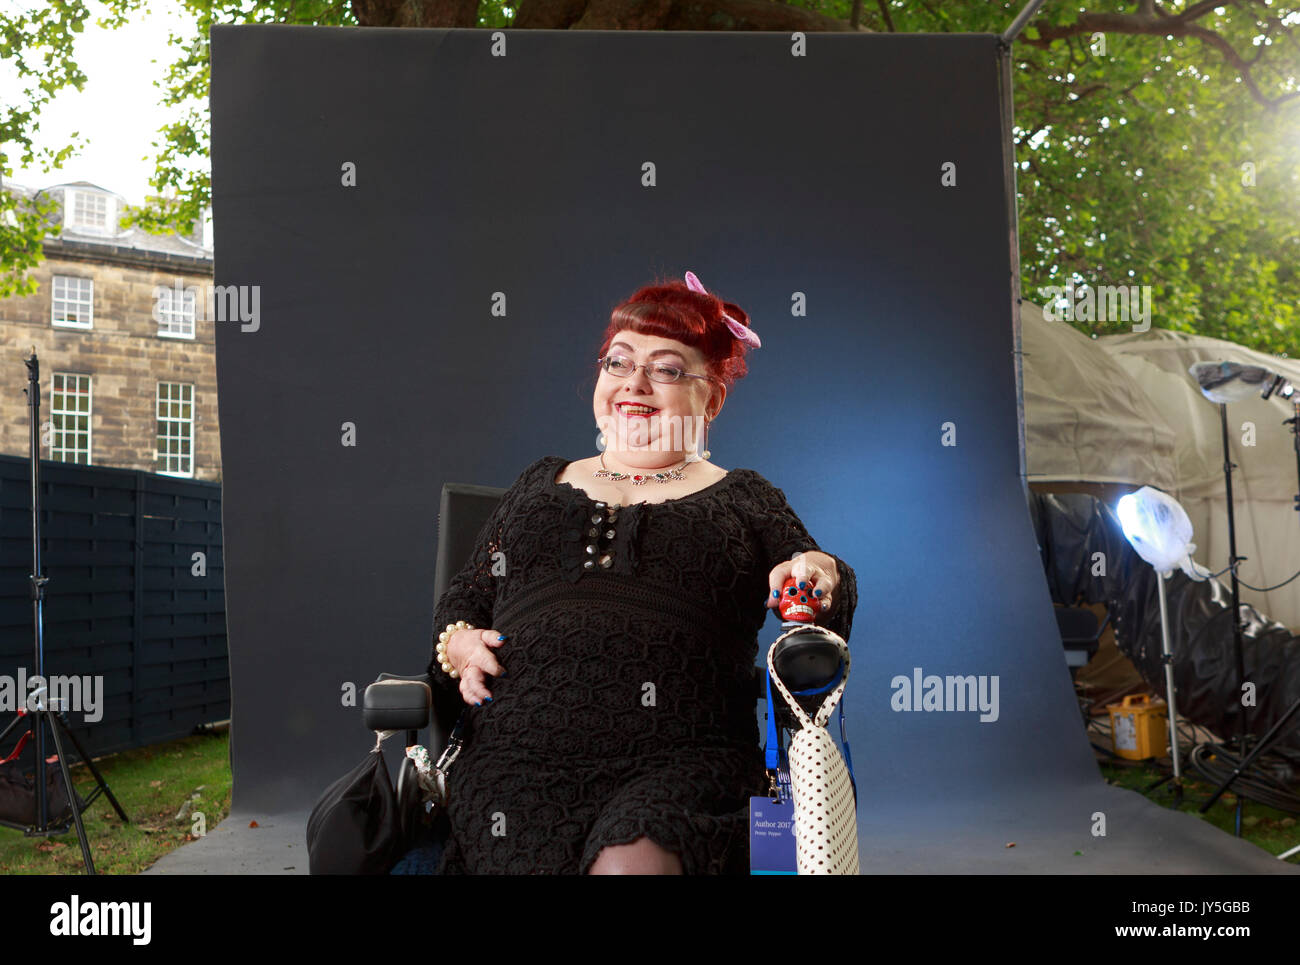 Edinburgh, Scotland 18th August. Day 7 Edinburgh International Book Festival. Pictured: Penny Pepper, writer and well-known rights activist. Credit: Pako Mera/Alamy Live News Stock Photo